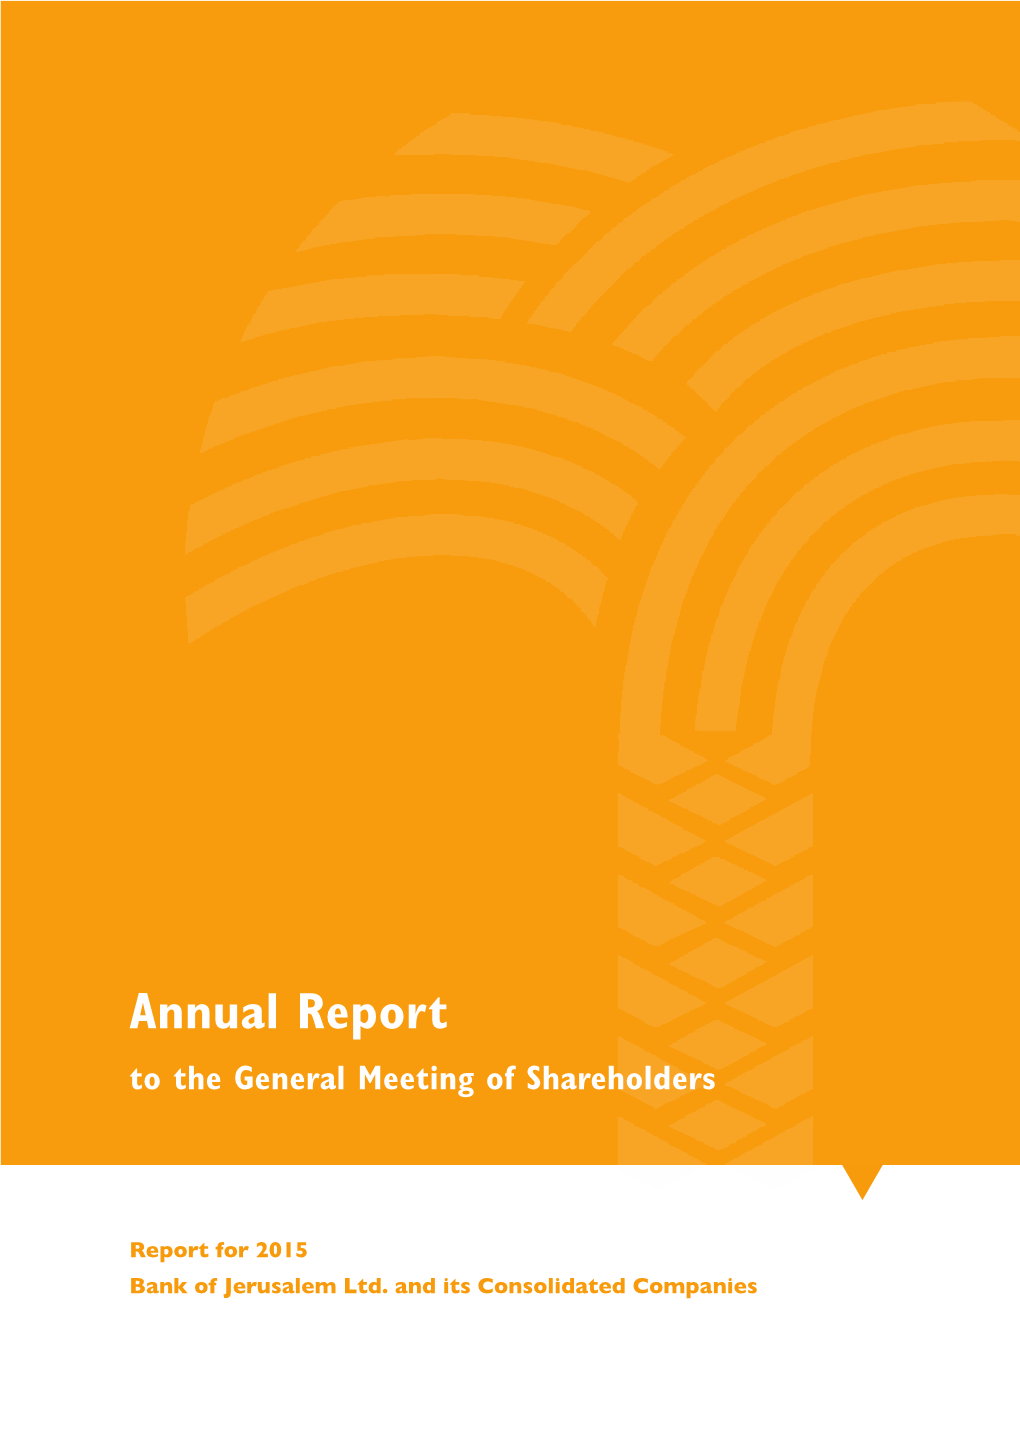 Annual Report to the General Meeting of Shareholders